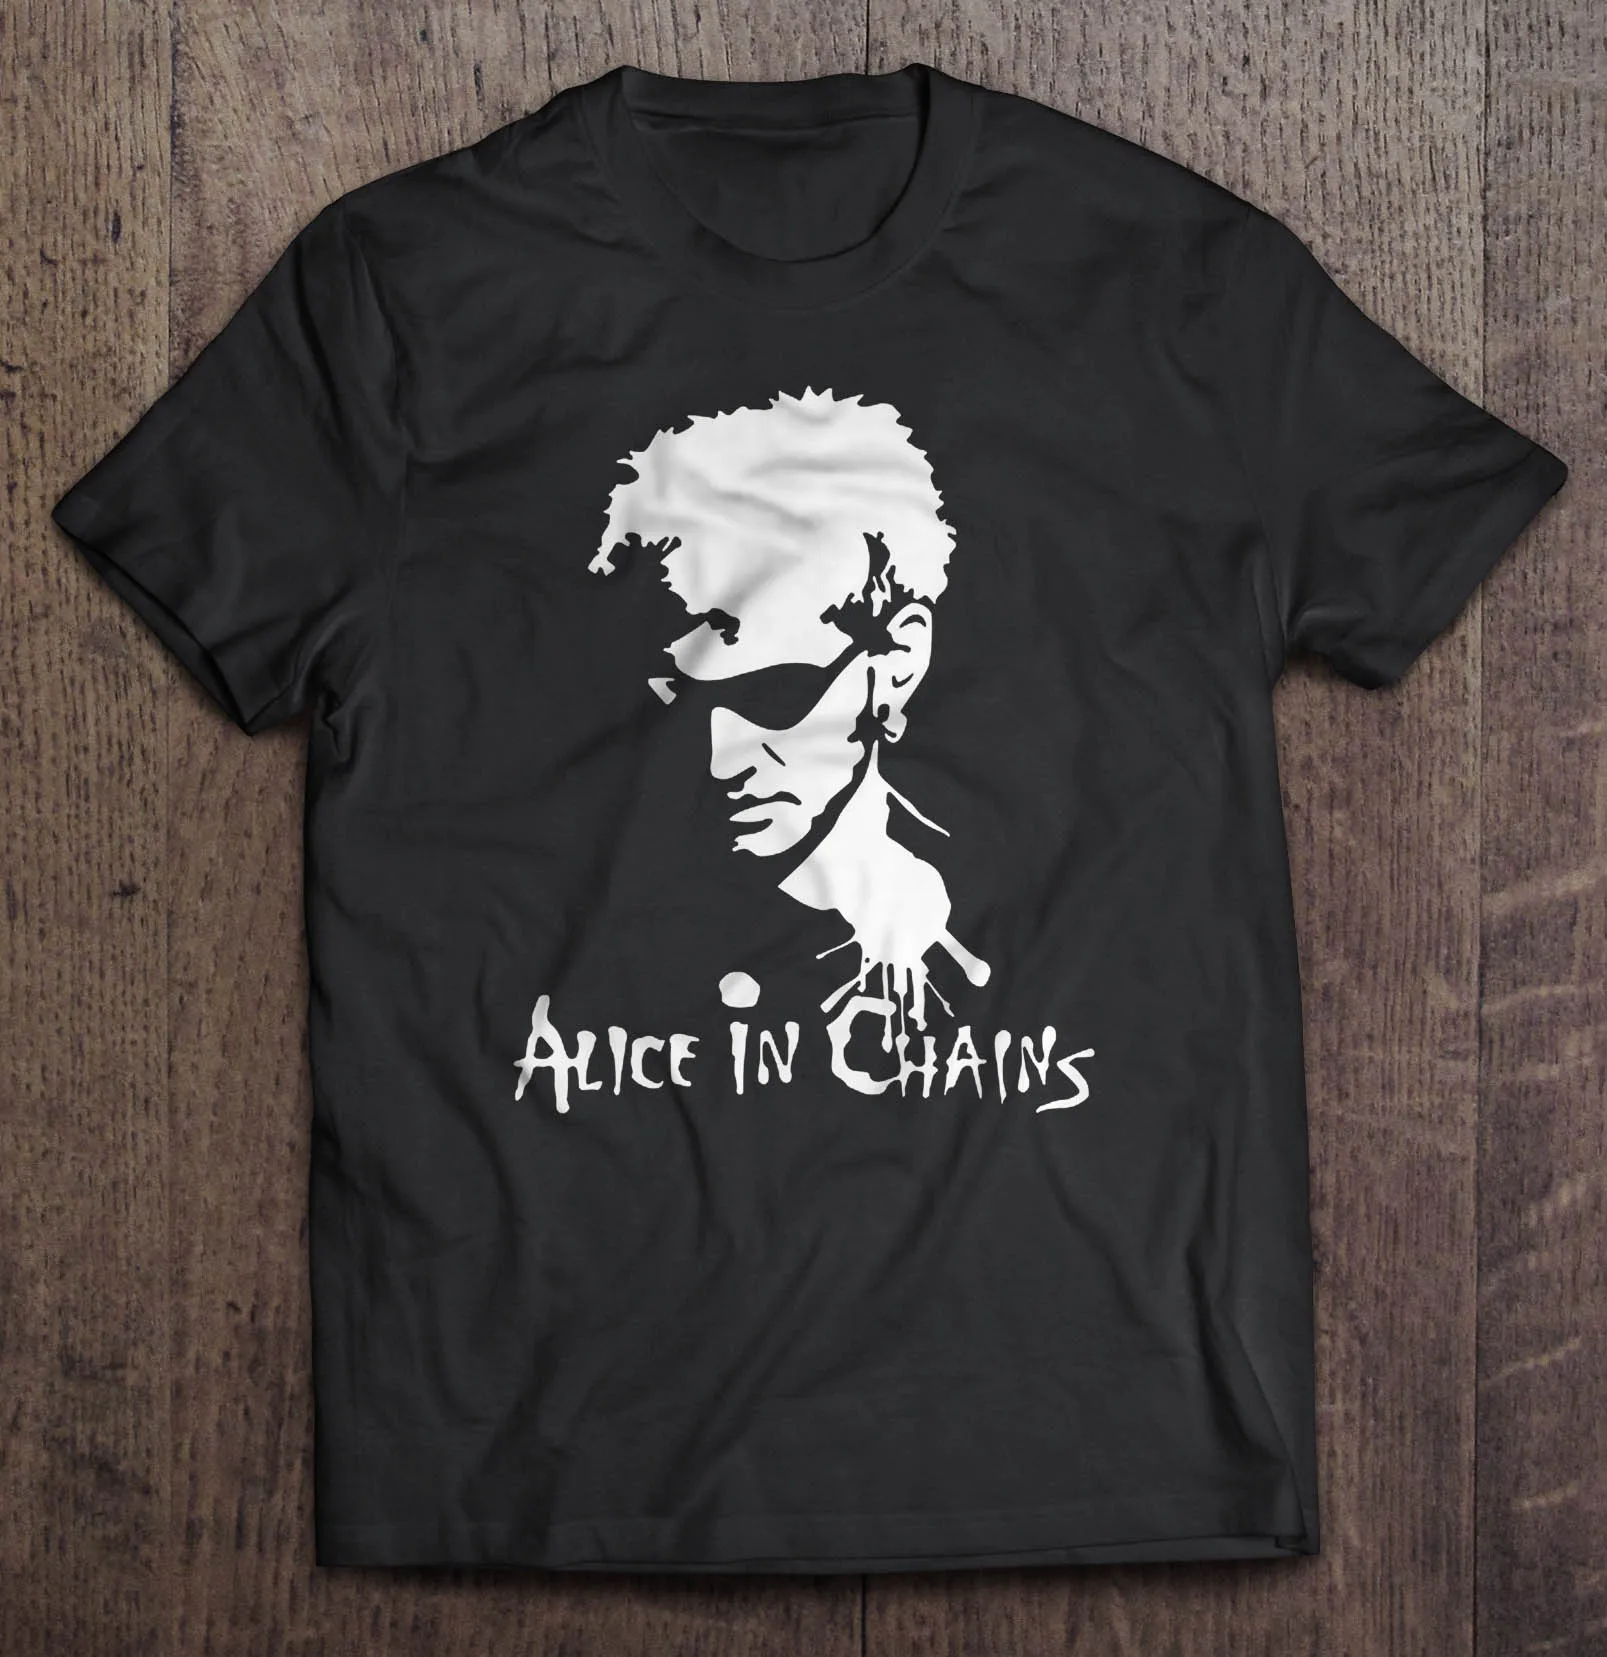 

Alice In Chains William Duvall Tshirts